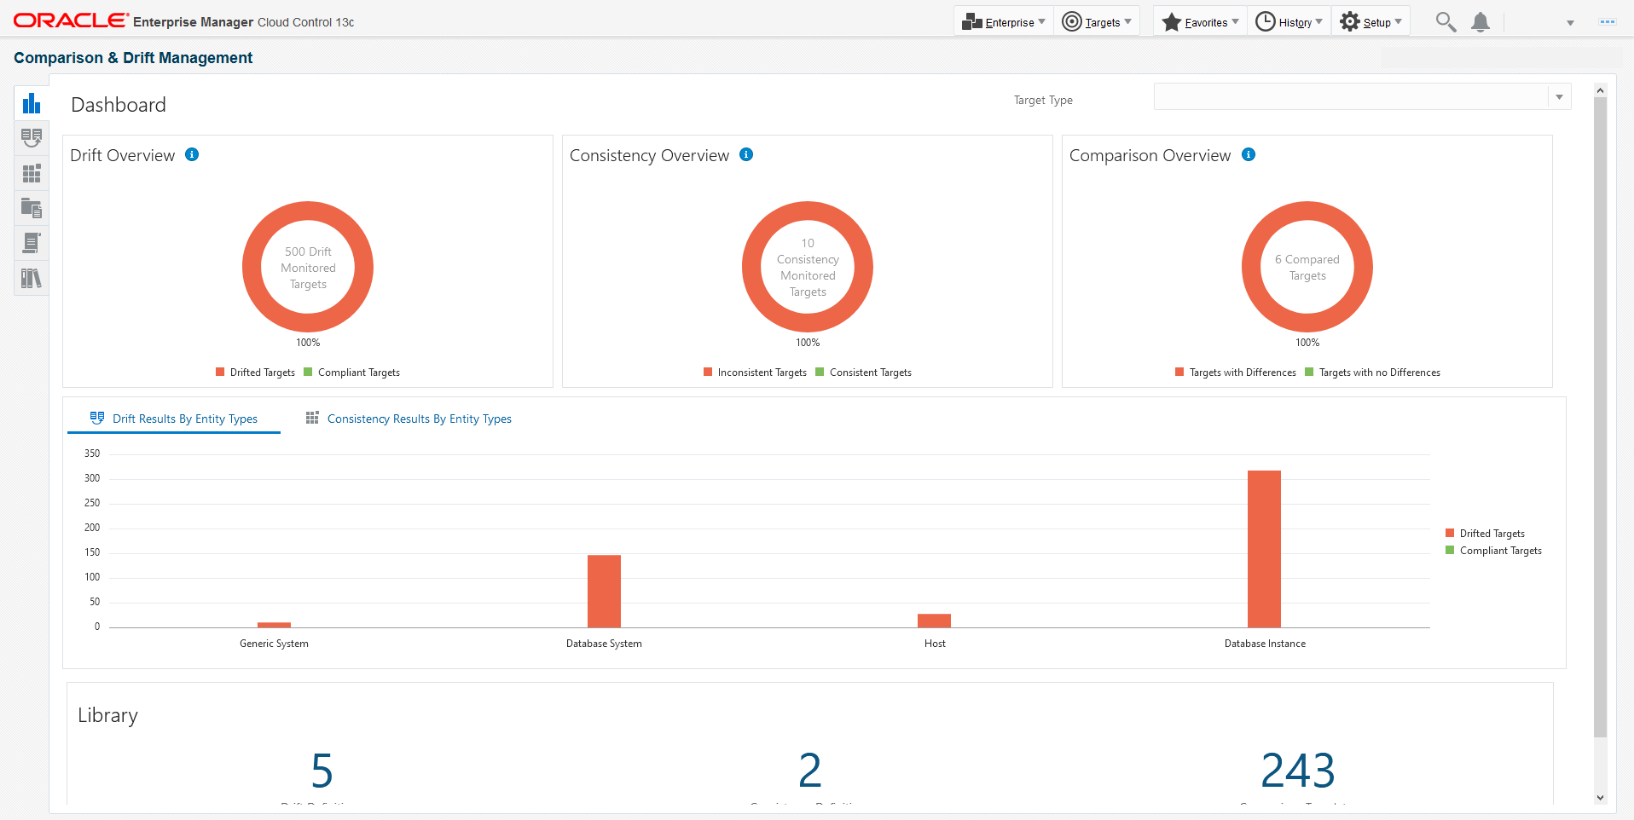 This image shows the new layout for the Comparison and Drift Management dashboard available for Enterprise Manager Release Update 5 and above.